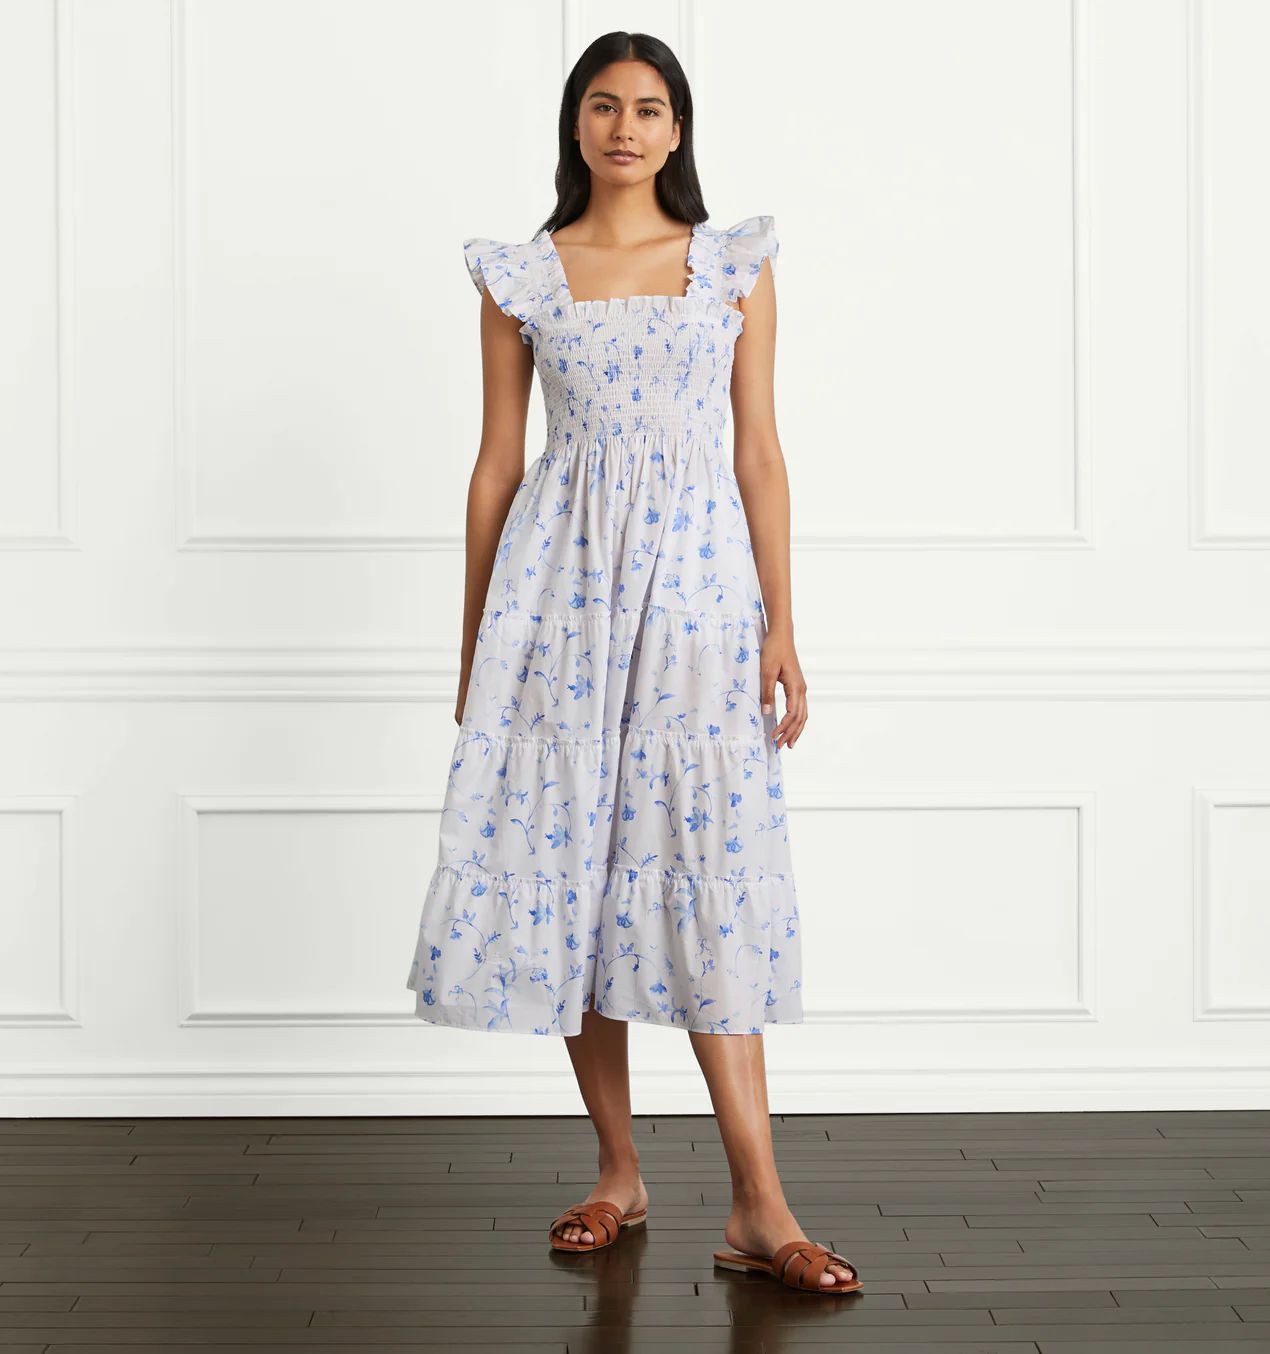 The Ellie Nap Dress - Wildflower Embroidery | Hill House Home